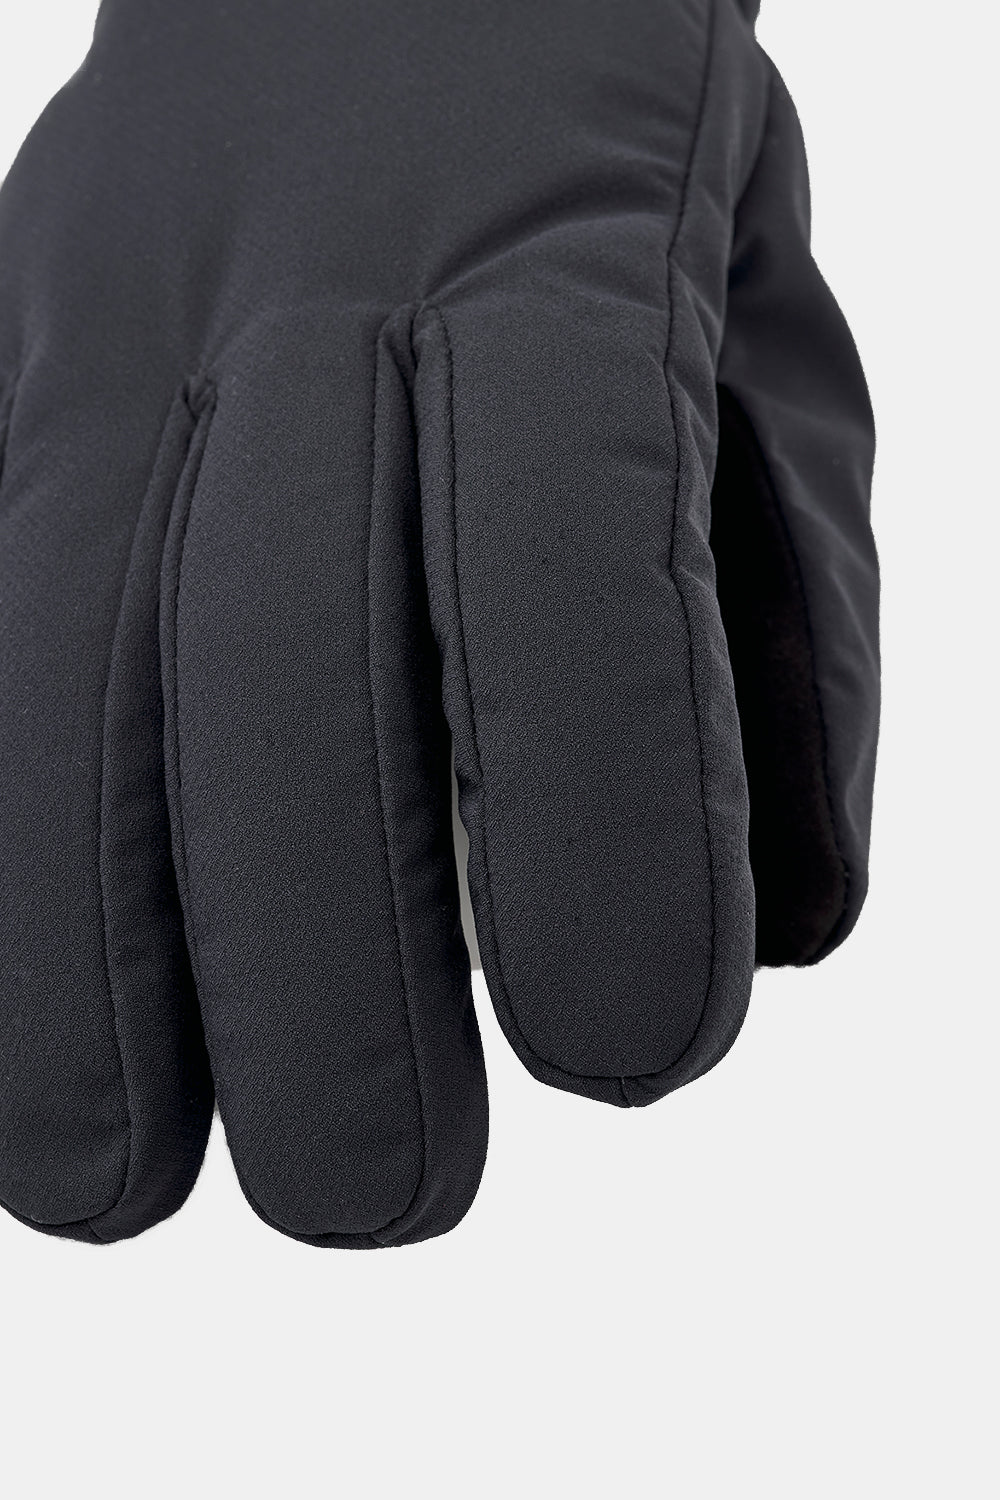 Hestra Axis Weather-resistant Breathable Gloves (Black)